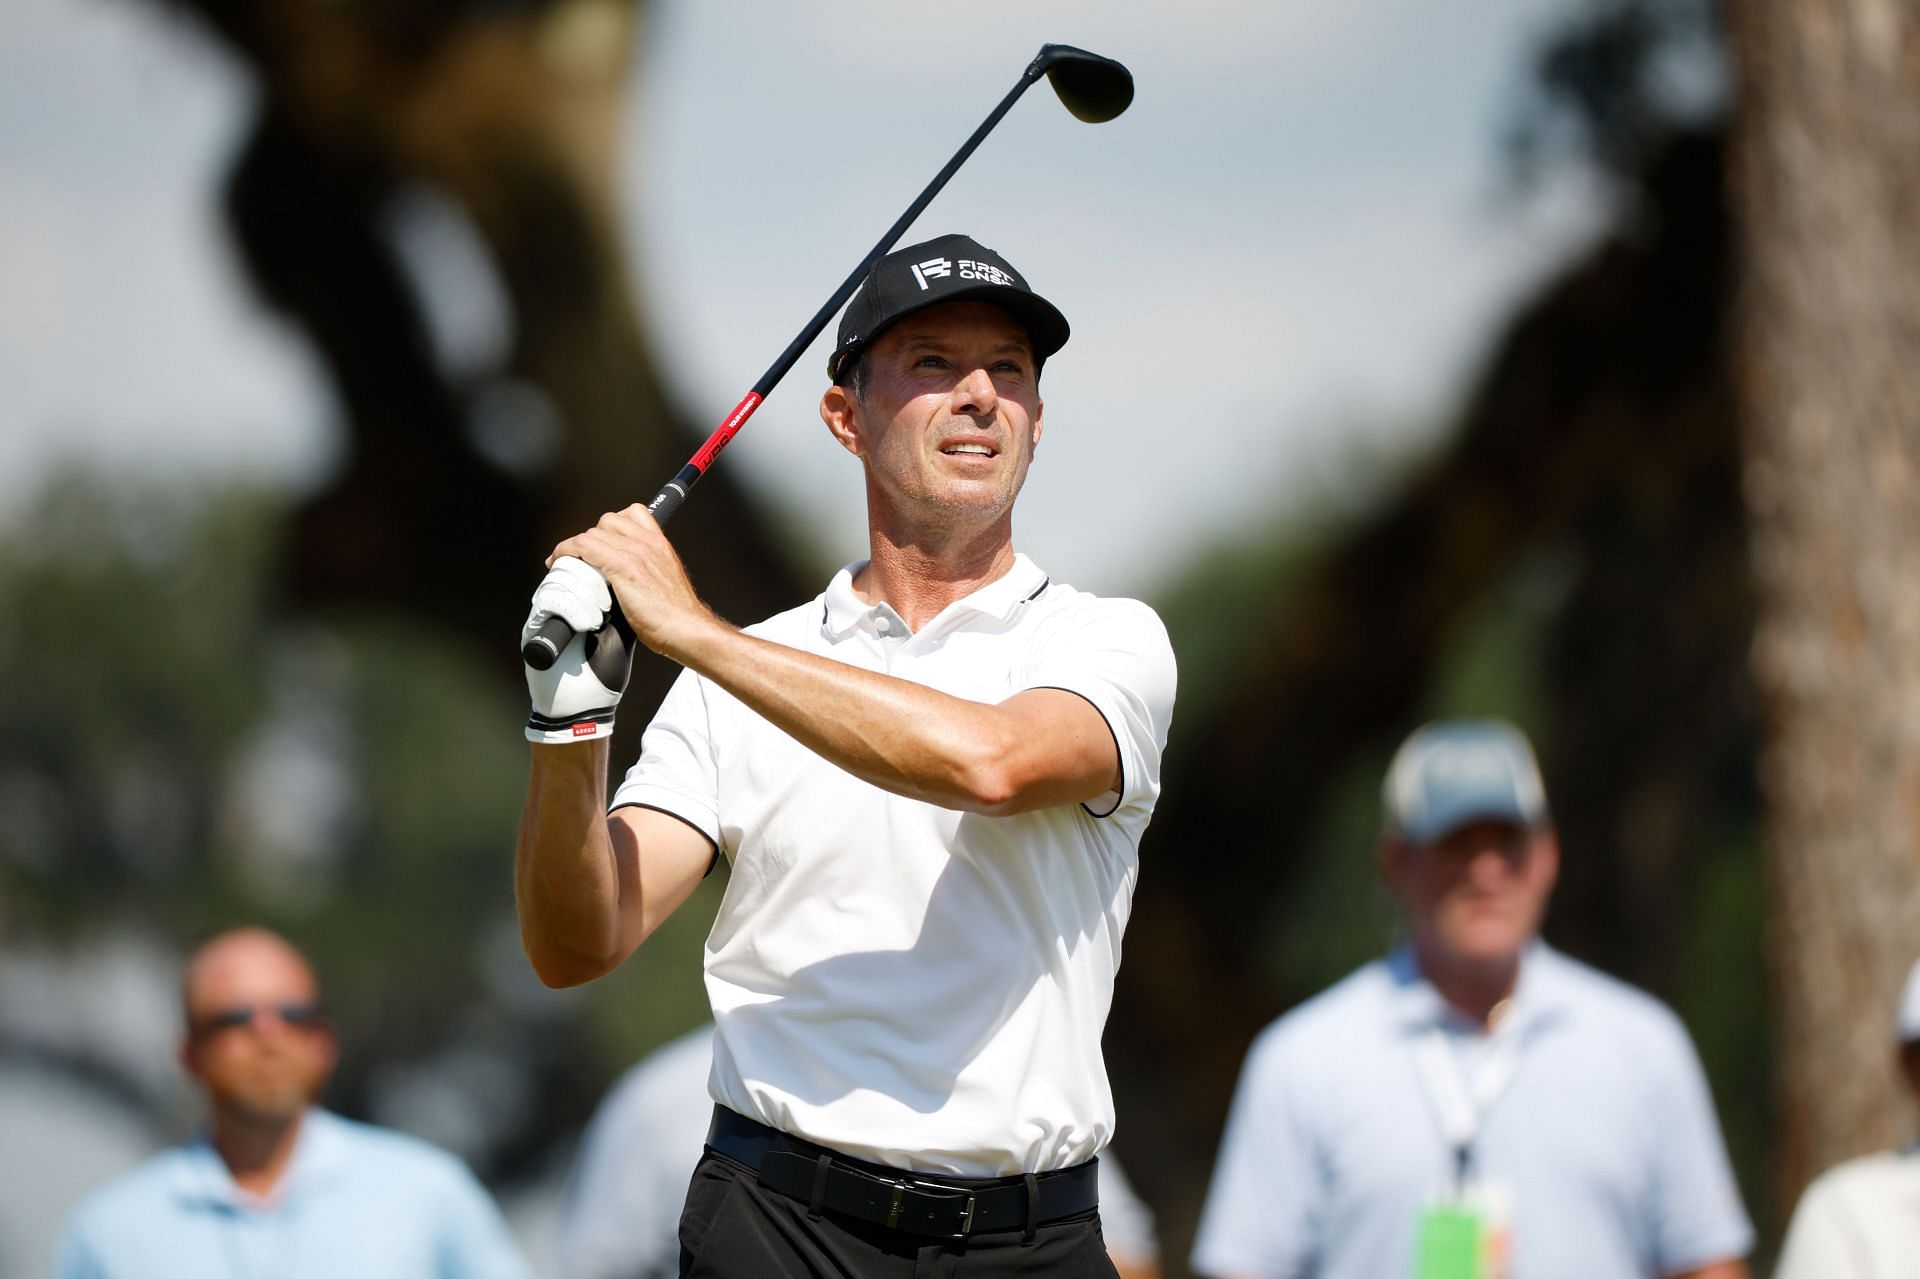 Mike Weir (Image via Cliff Hawkins/Getty Images)